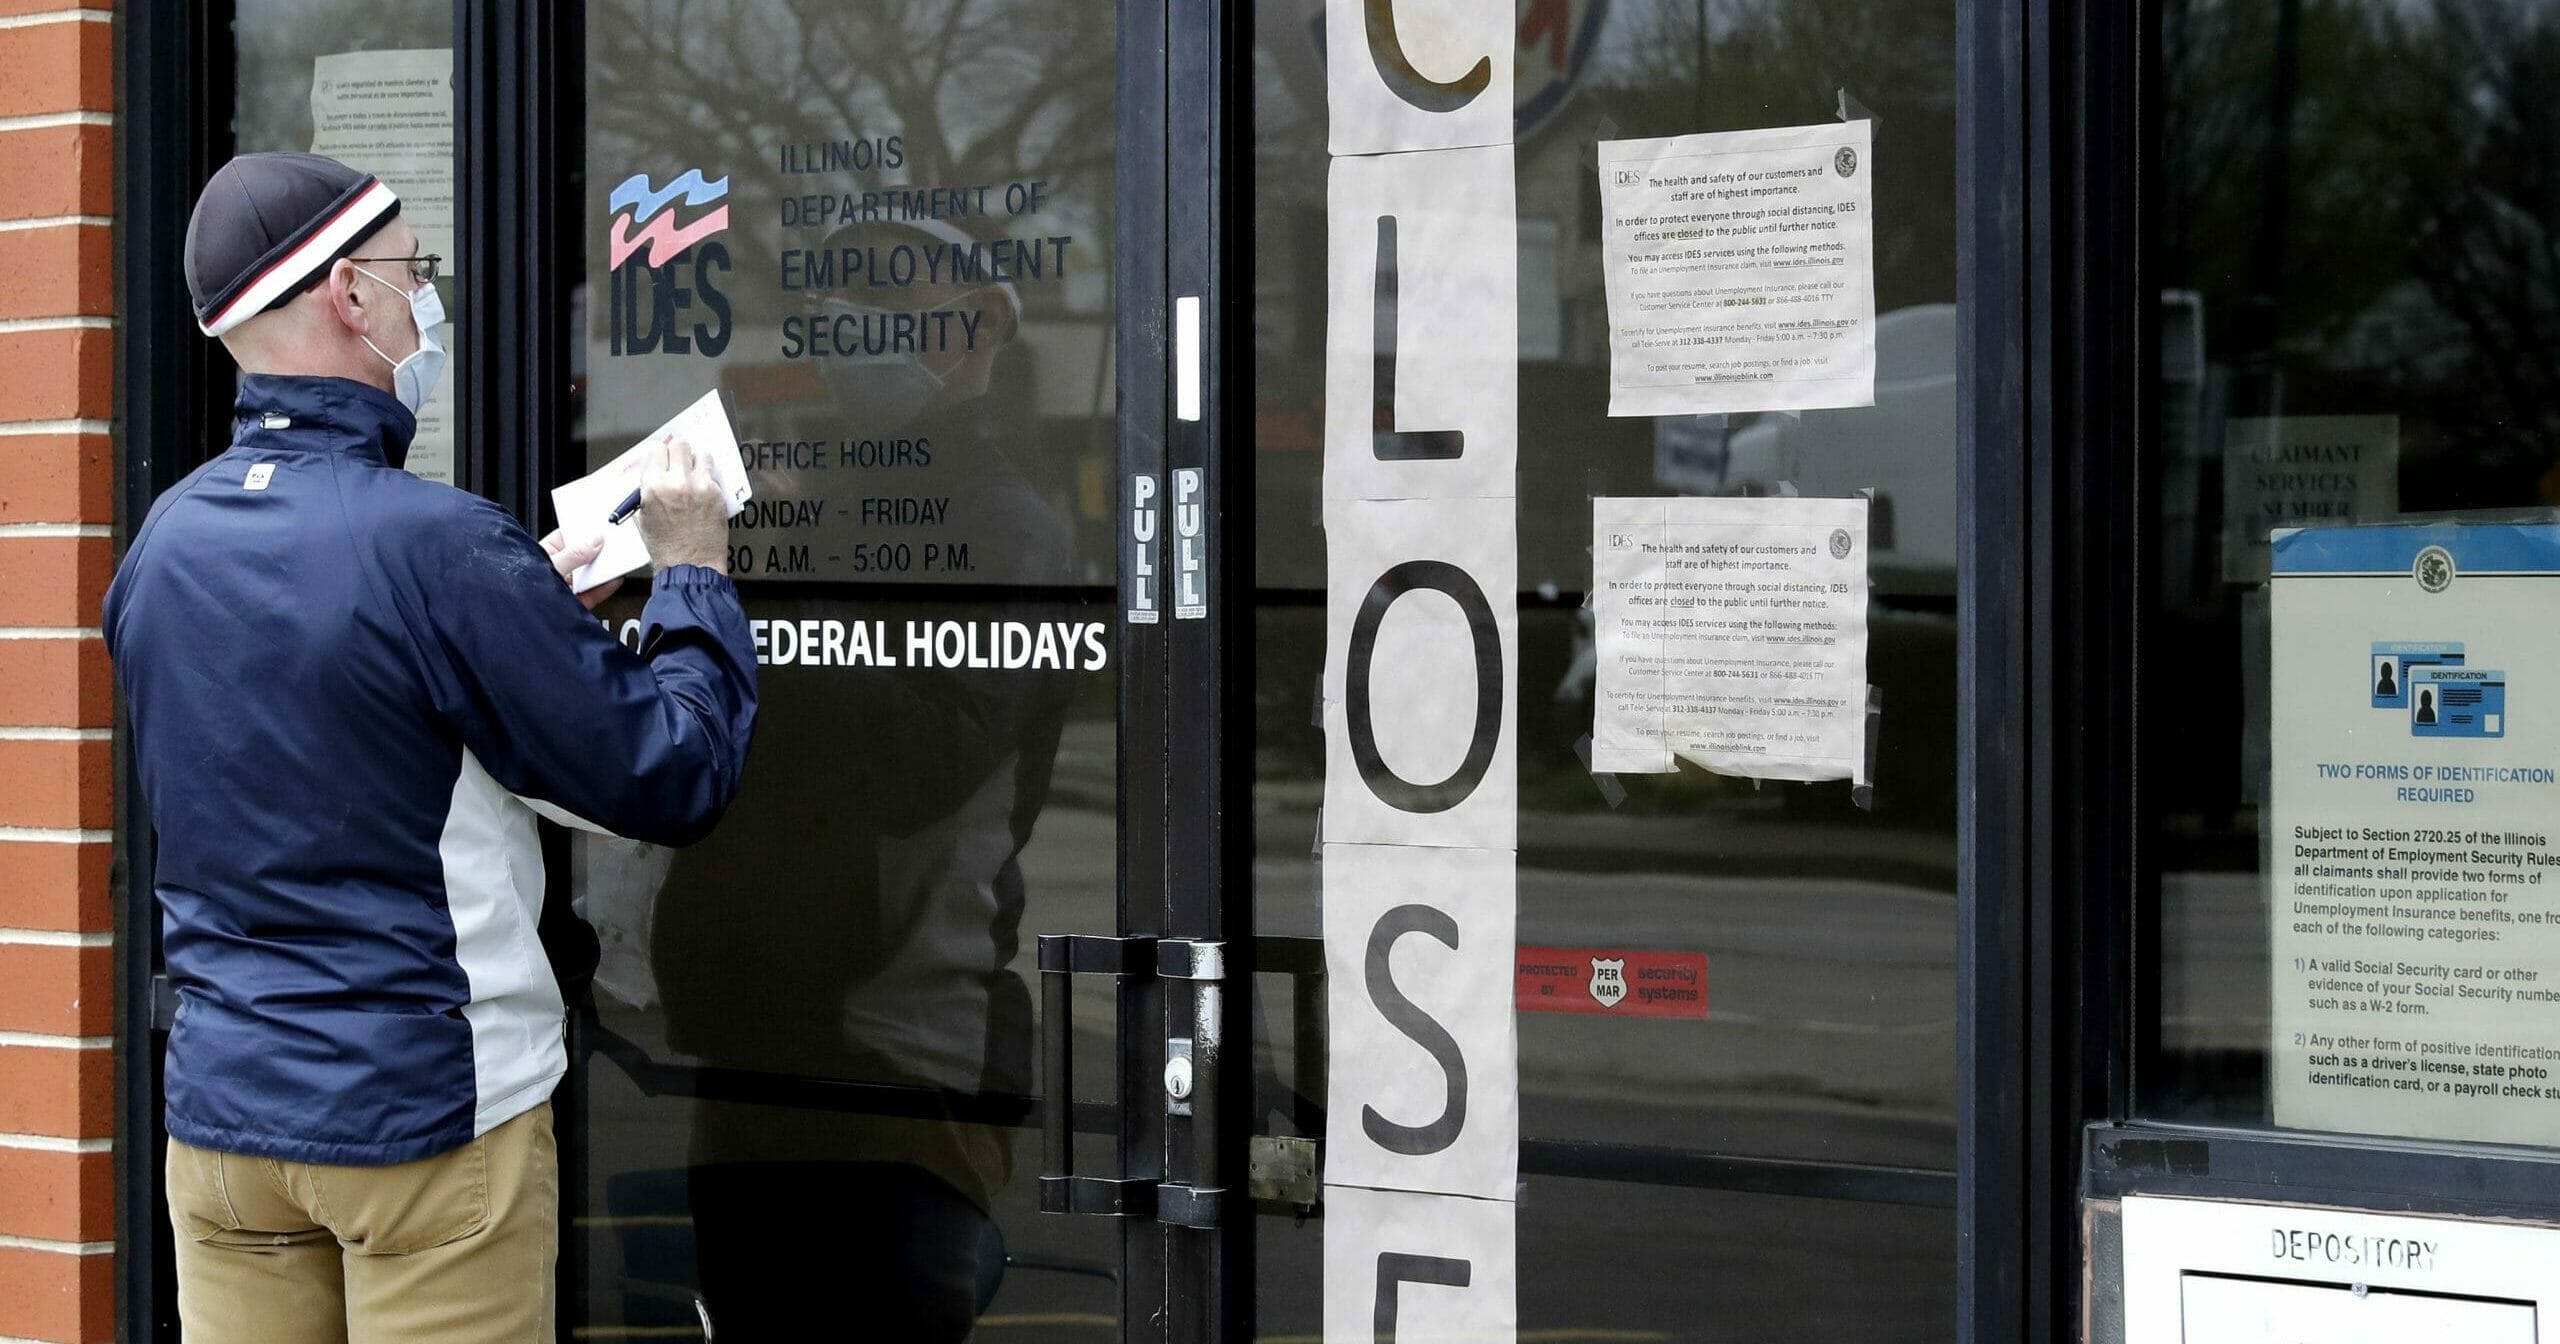 A man writes information in front of the Illinois Department of Employment Security in Chicago on April 30, 2020.